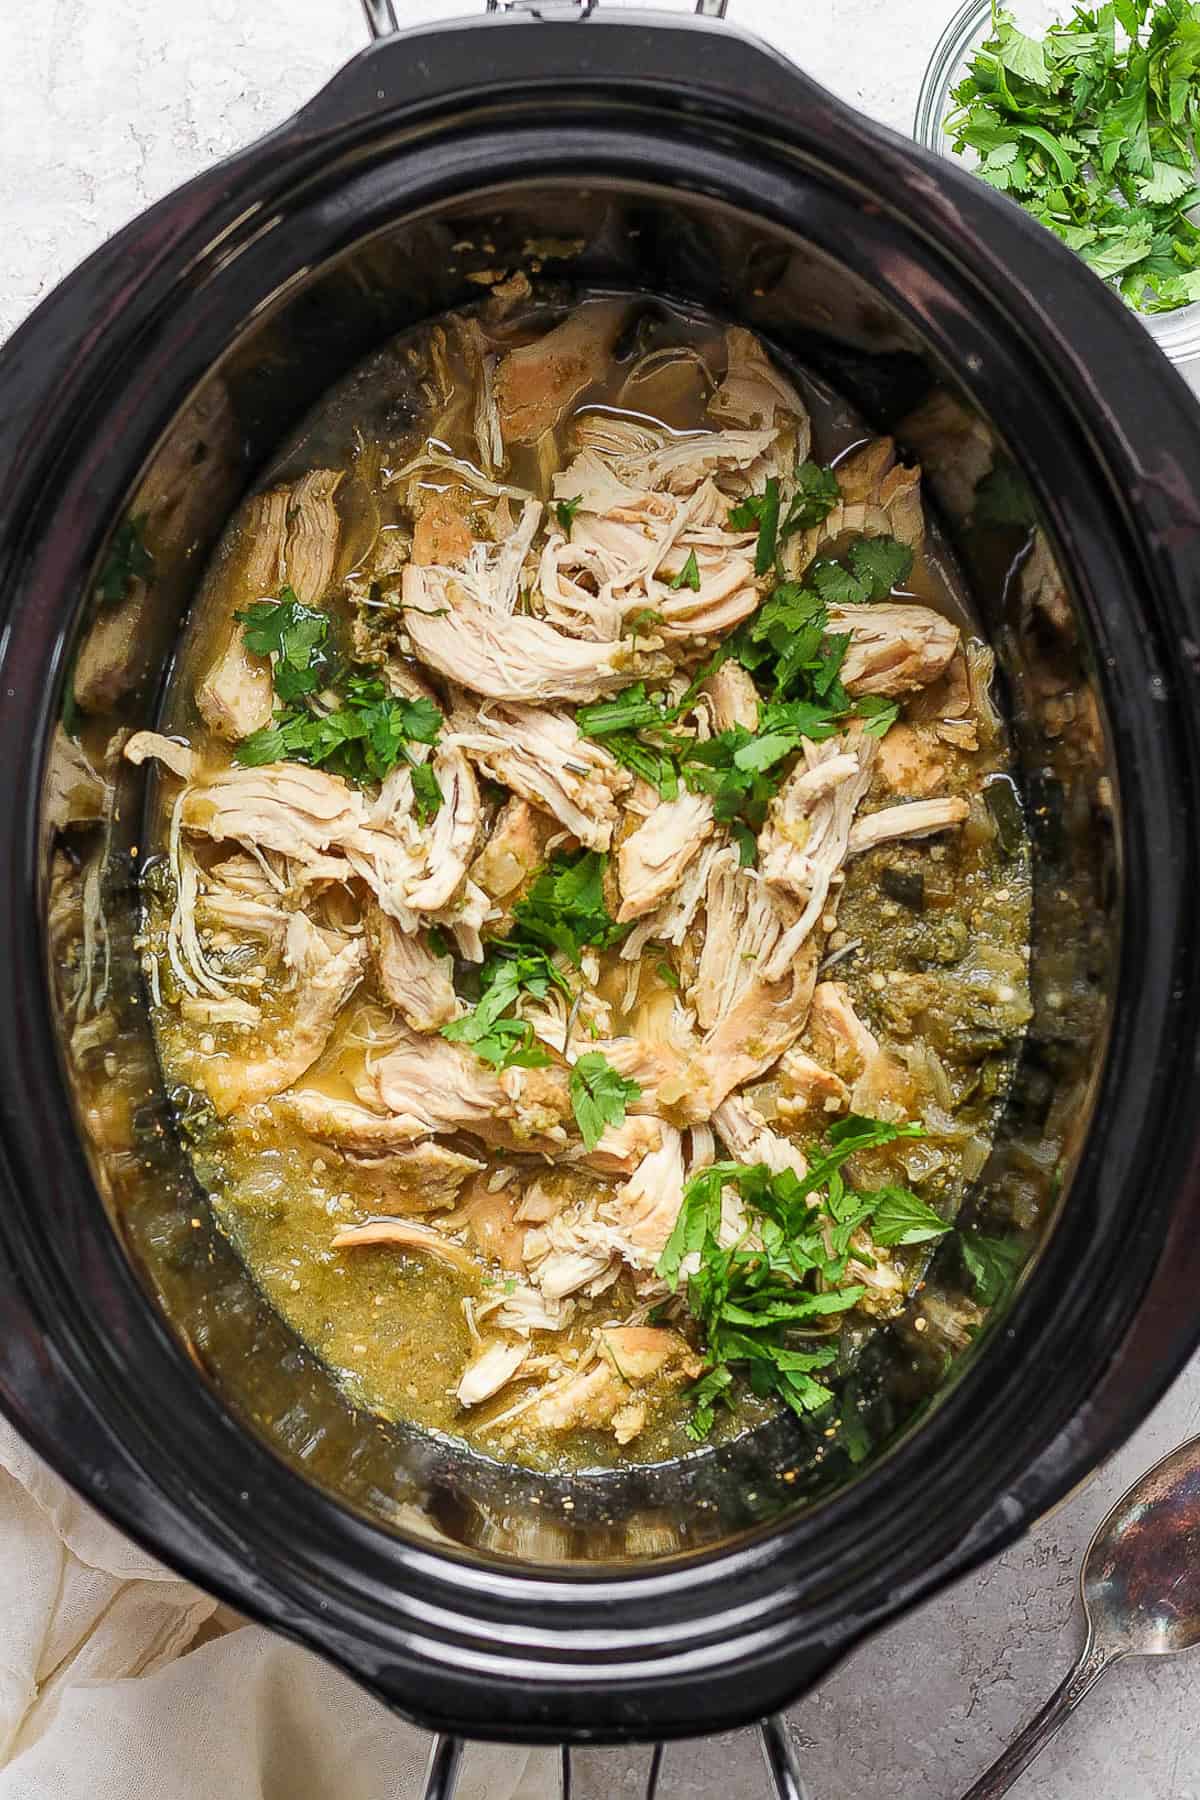 Salsa verde chicken cooked and ready to eat inside the crockpot